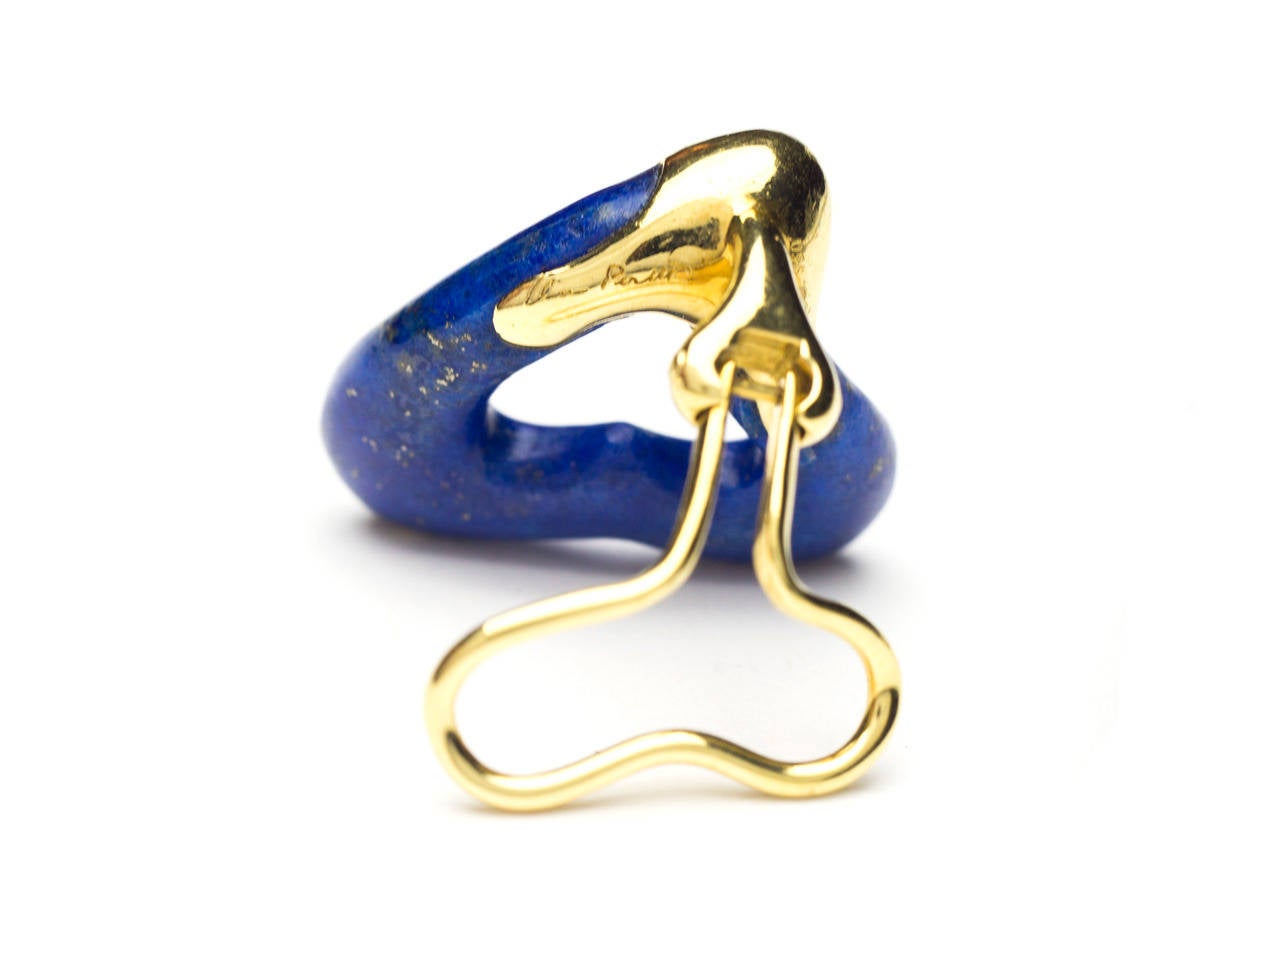 18k gold earclips in a free-form lapis heart design. Signed ELSA PERETTI.